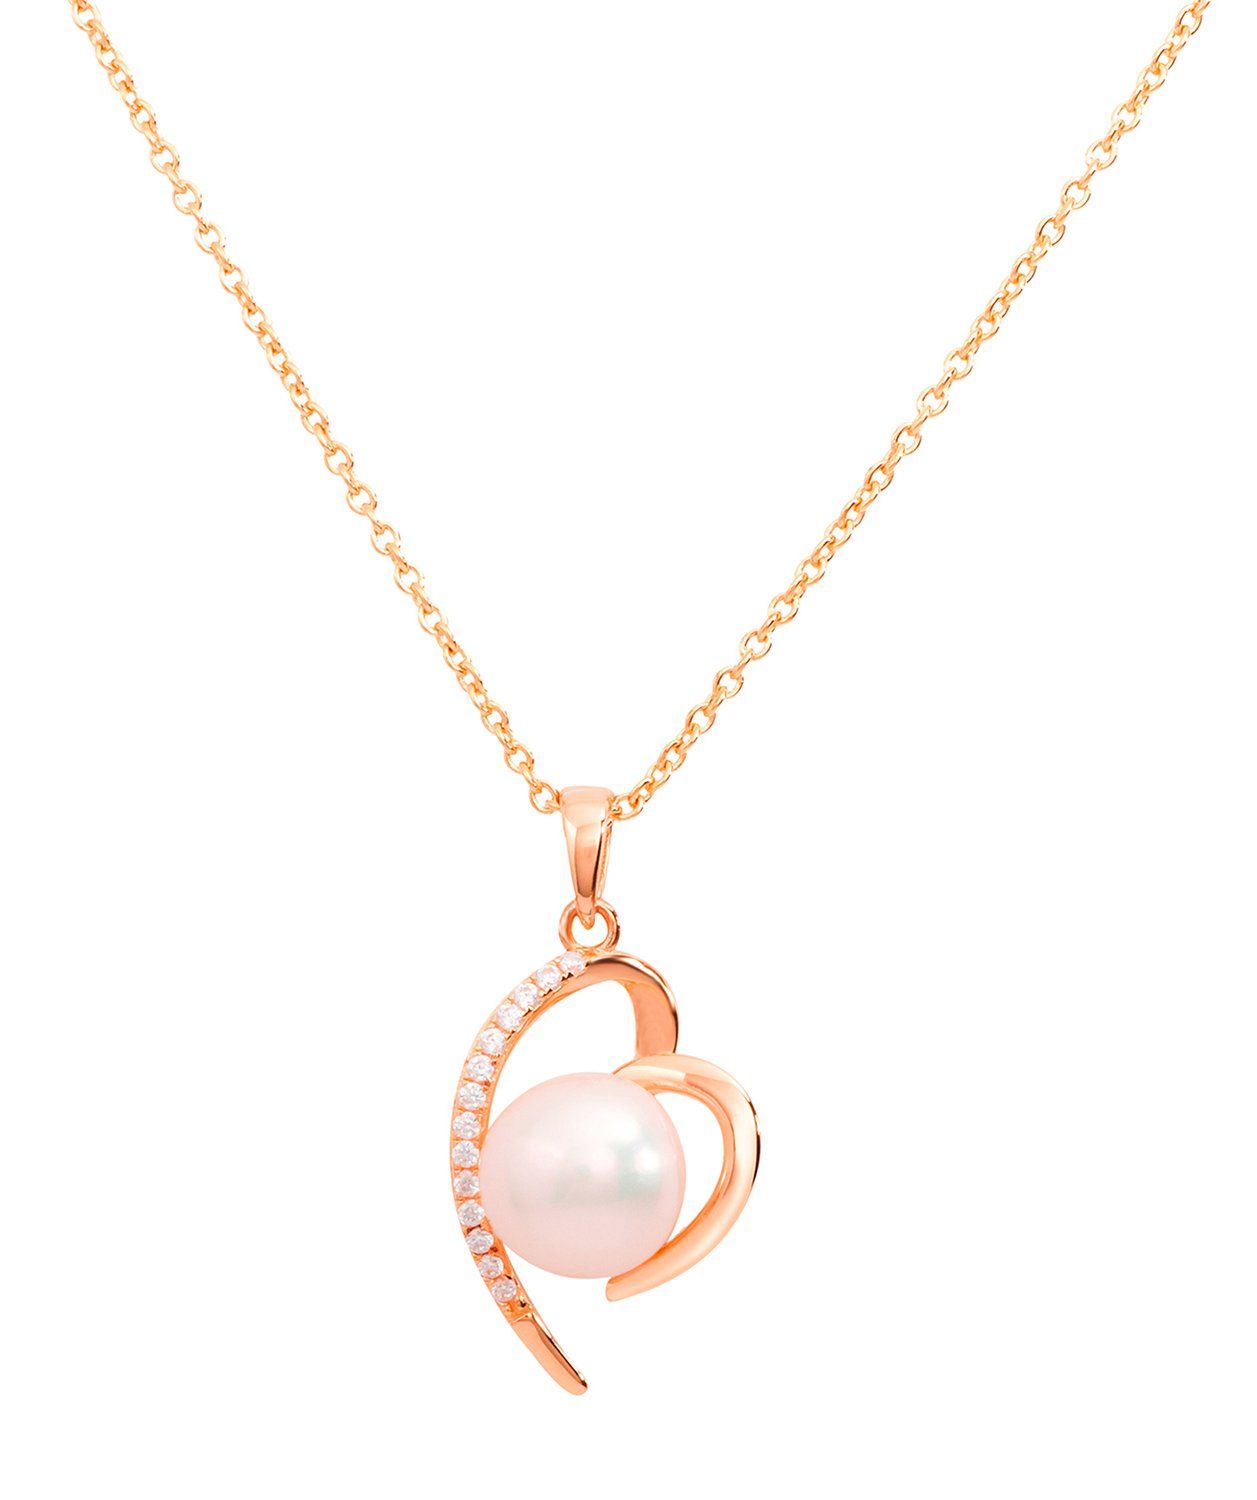 Pearl Heart Necklace in White, Yellow or Rose Gold